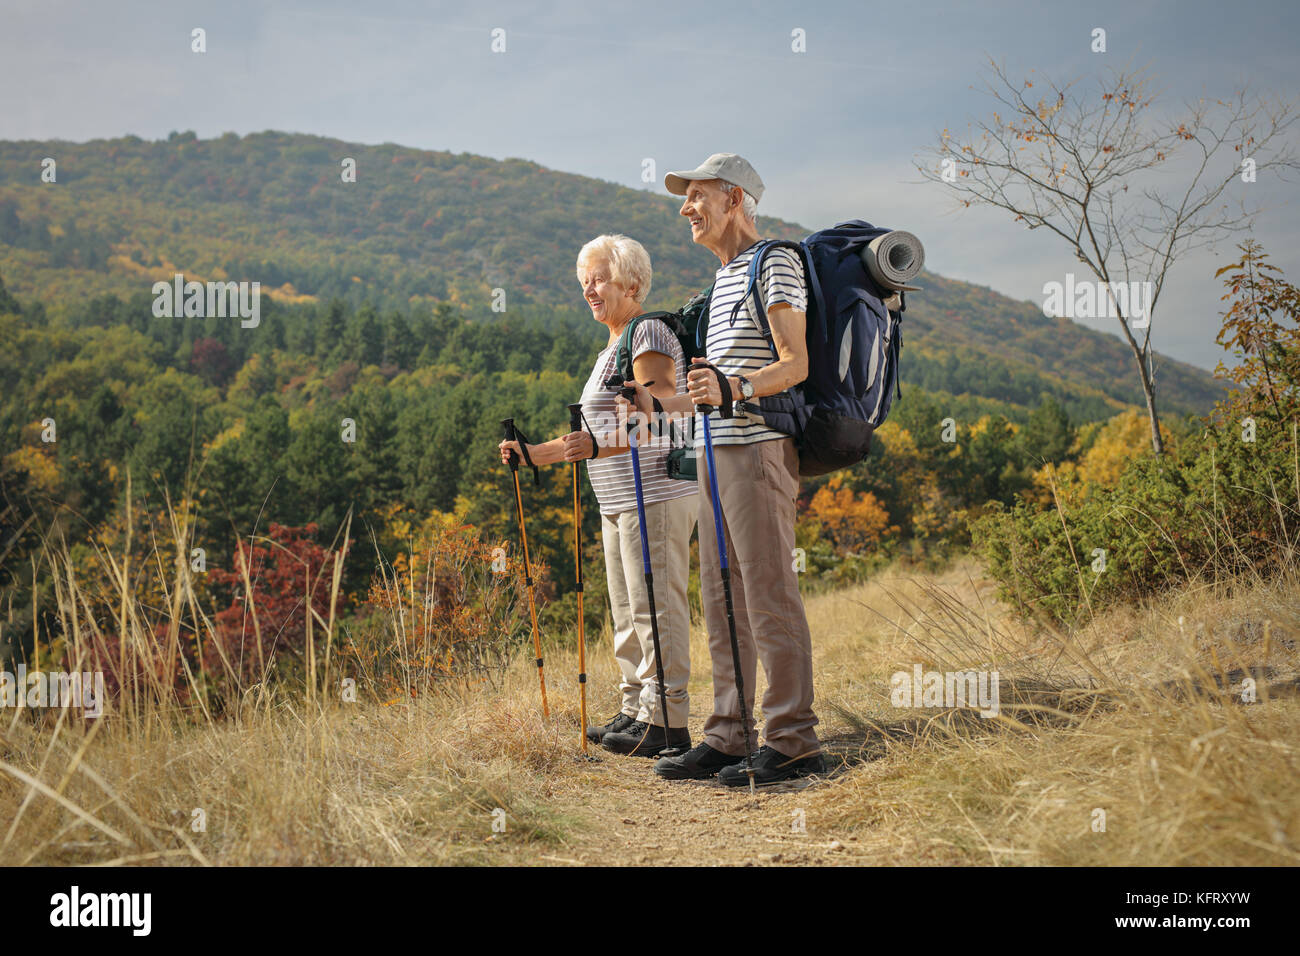 Full length profile shot of elderly hikers looking away outdoors Stock Photo